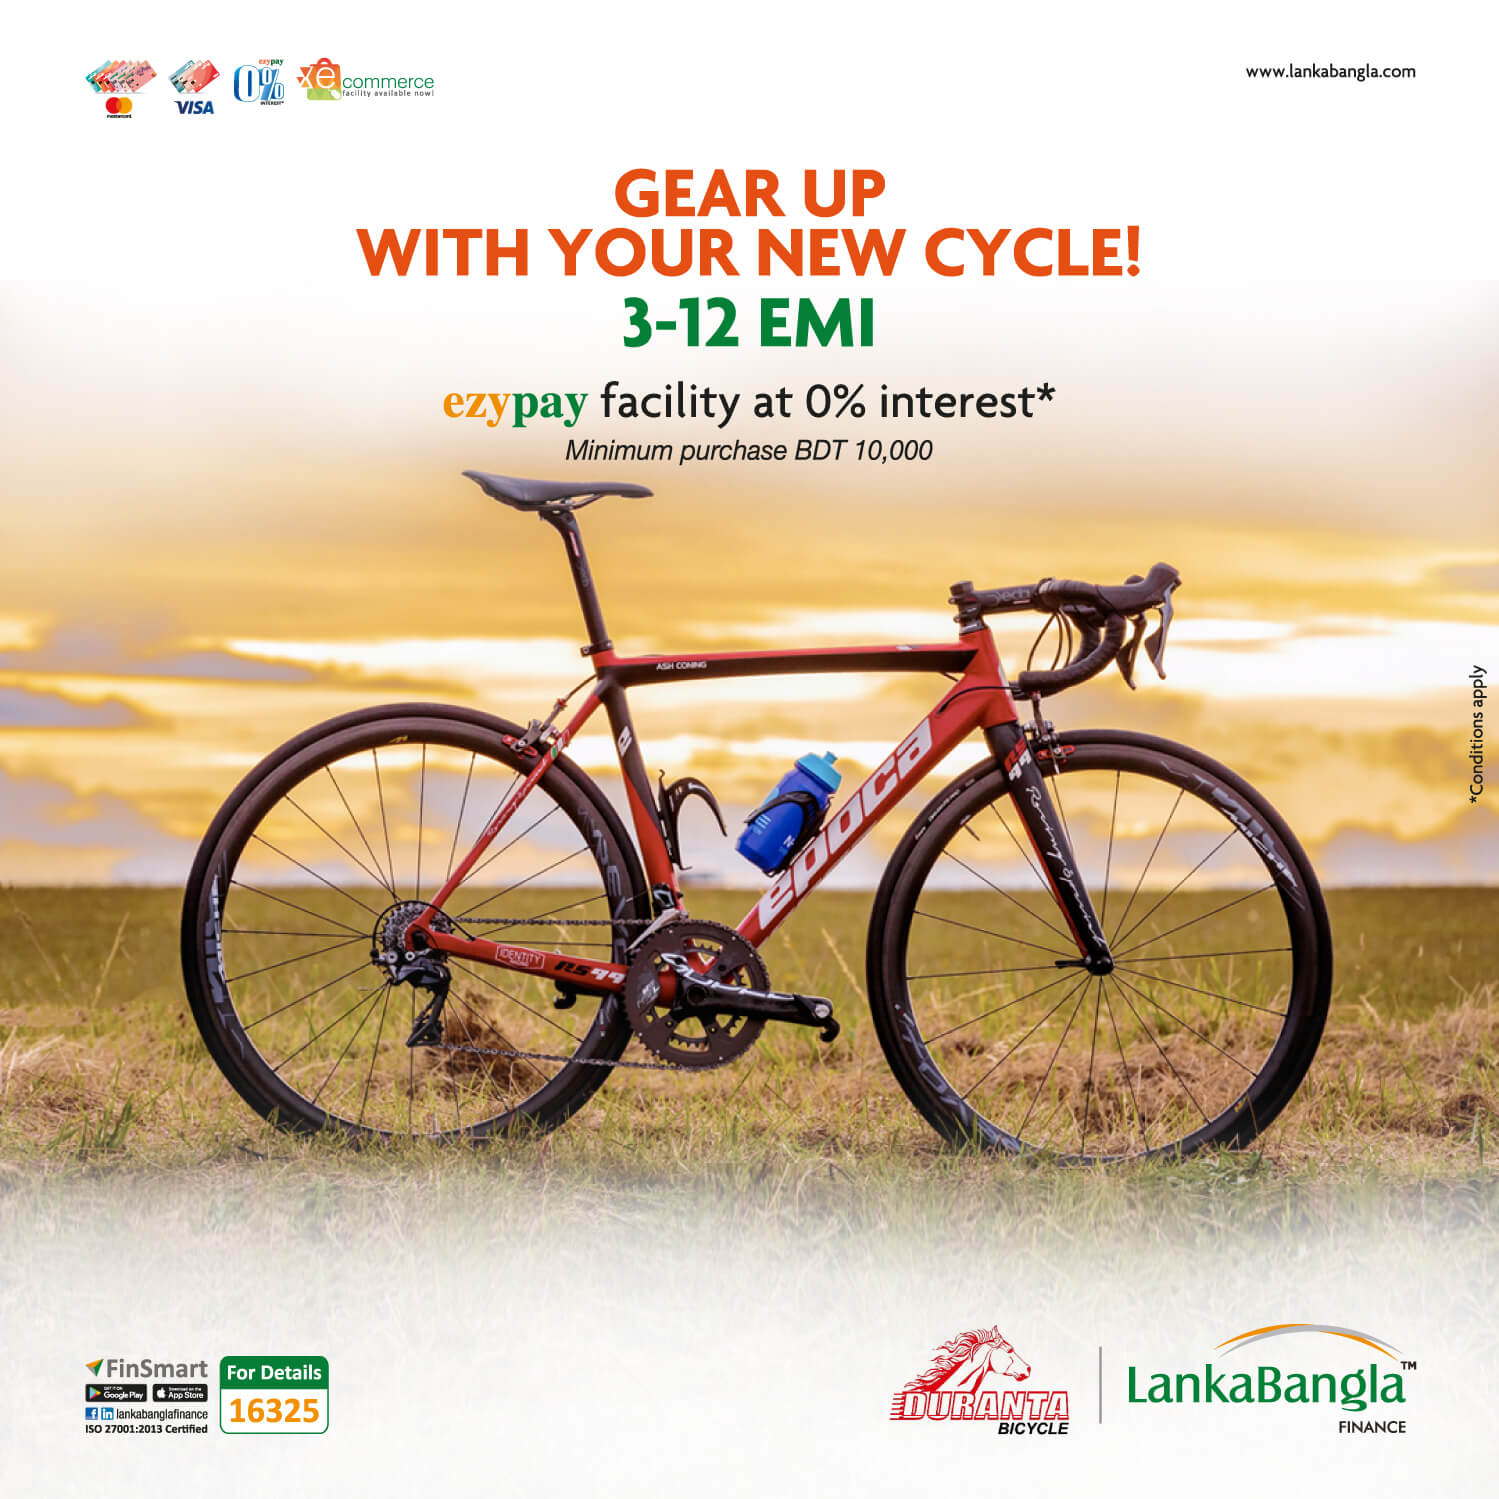 Gear Up With Your New Cycle!